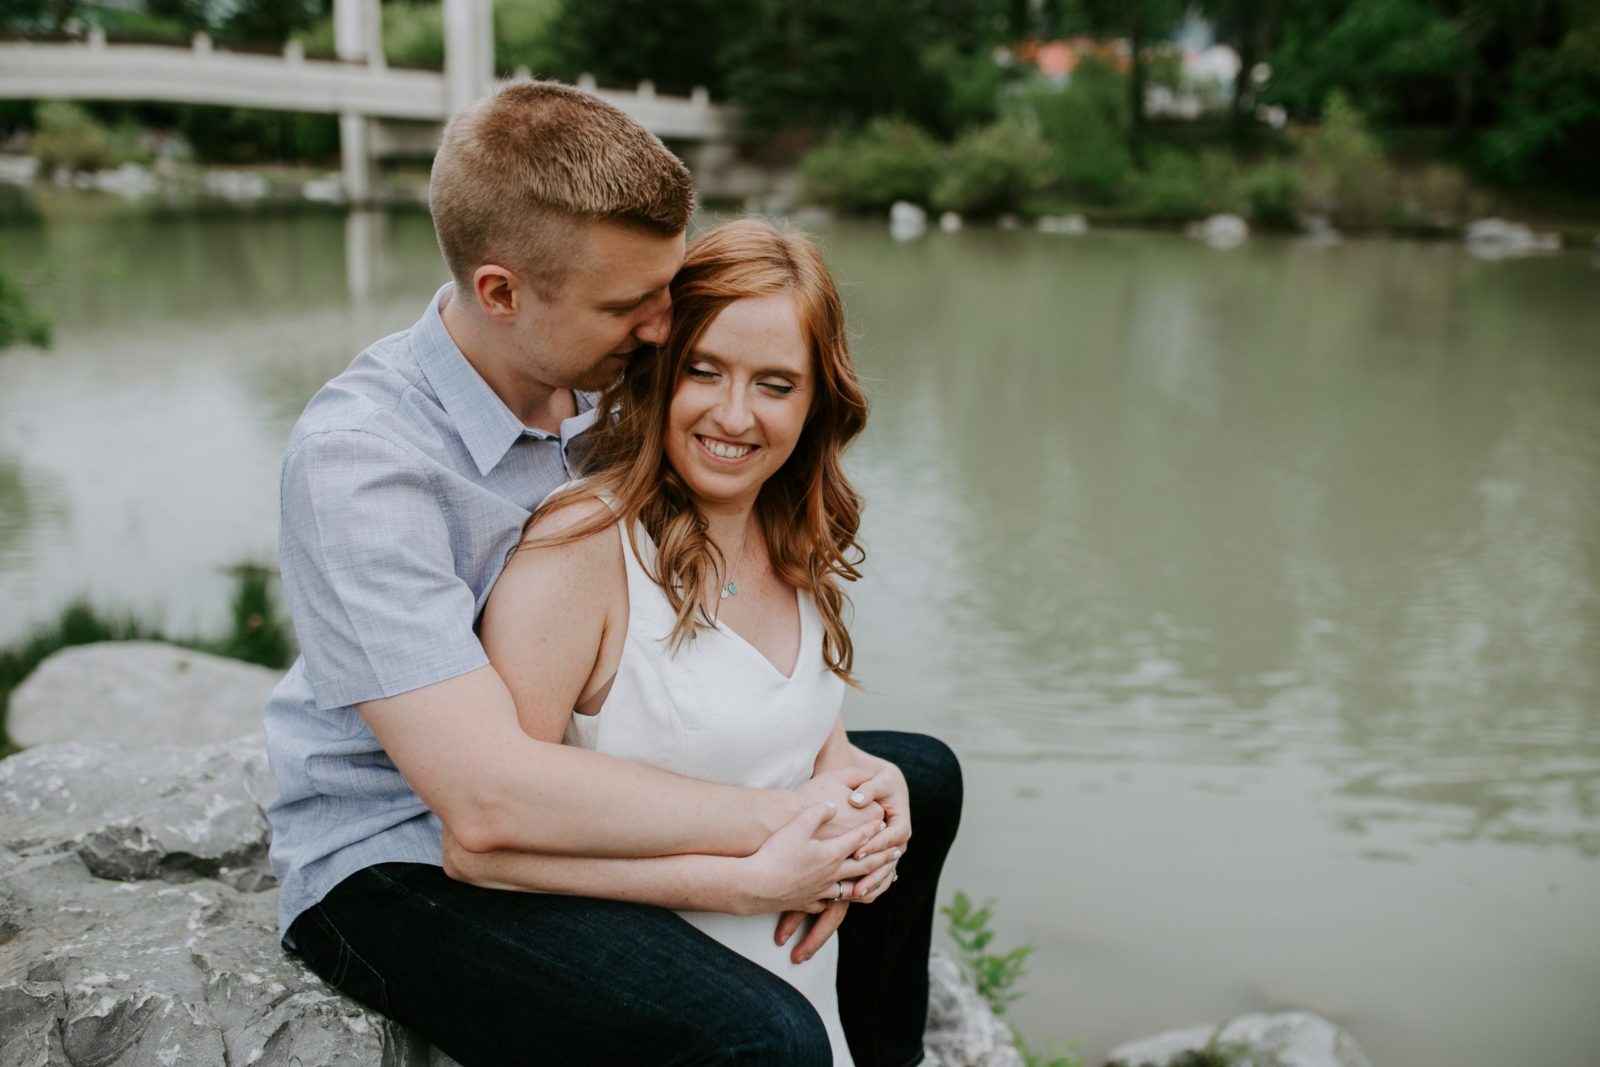 6 Tips All About Choosing Outfits For Your Engagement Session - Deanna Rachel featured on Bronte Bride